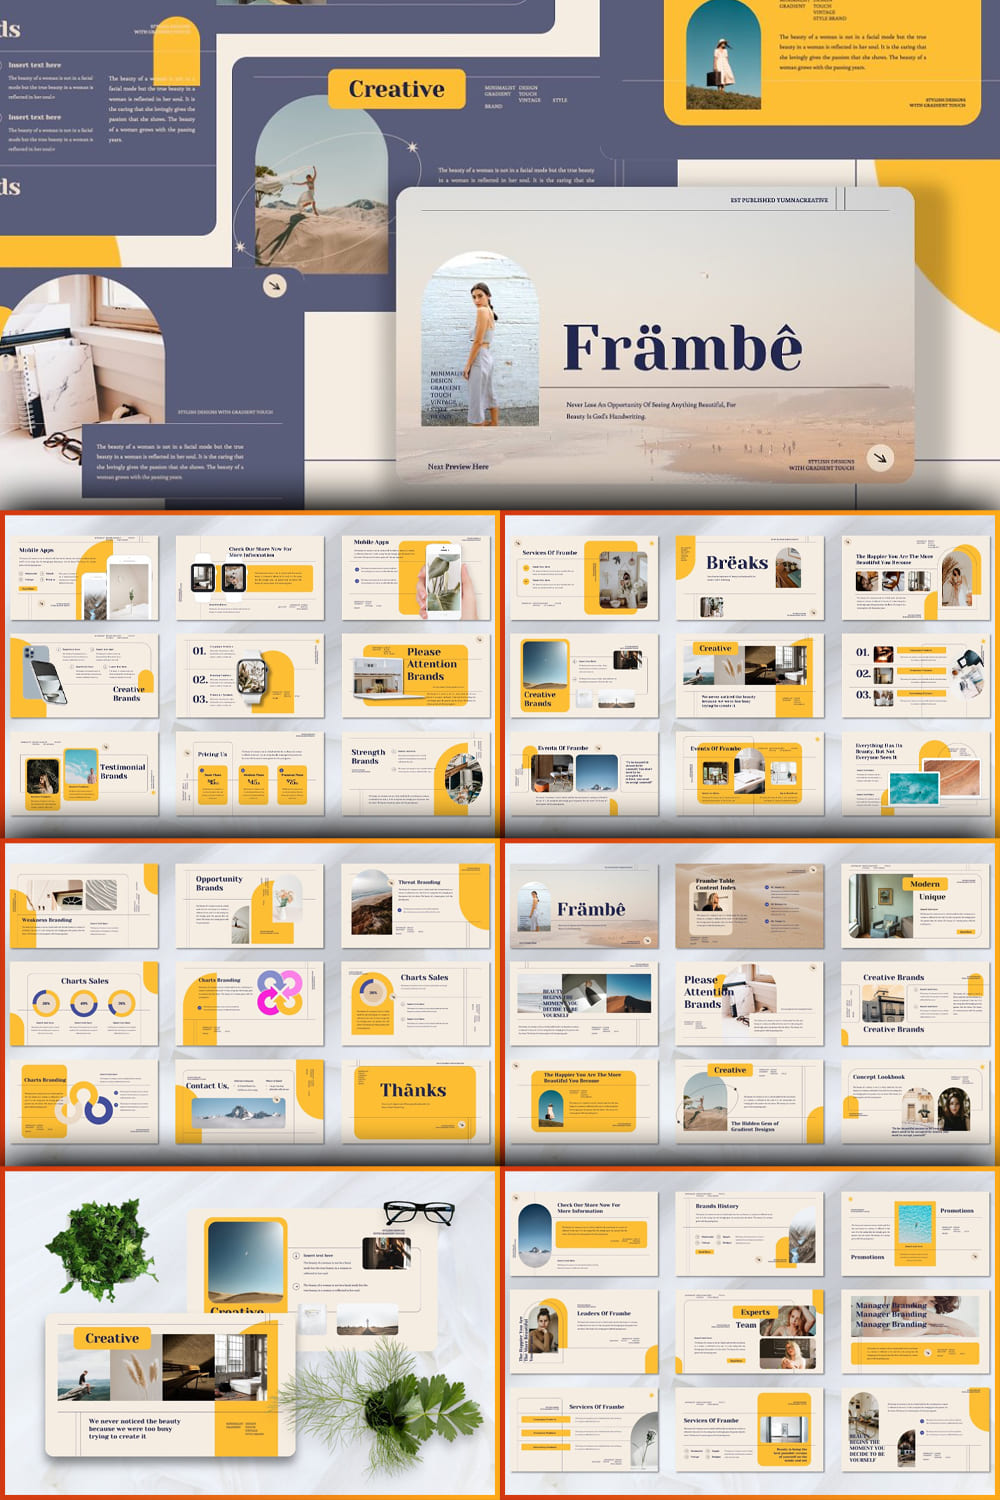 Frambe - Creative Brands Powerpoint pinterest image preview.